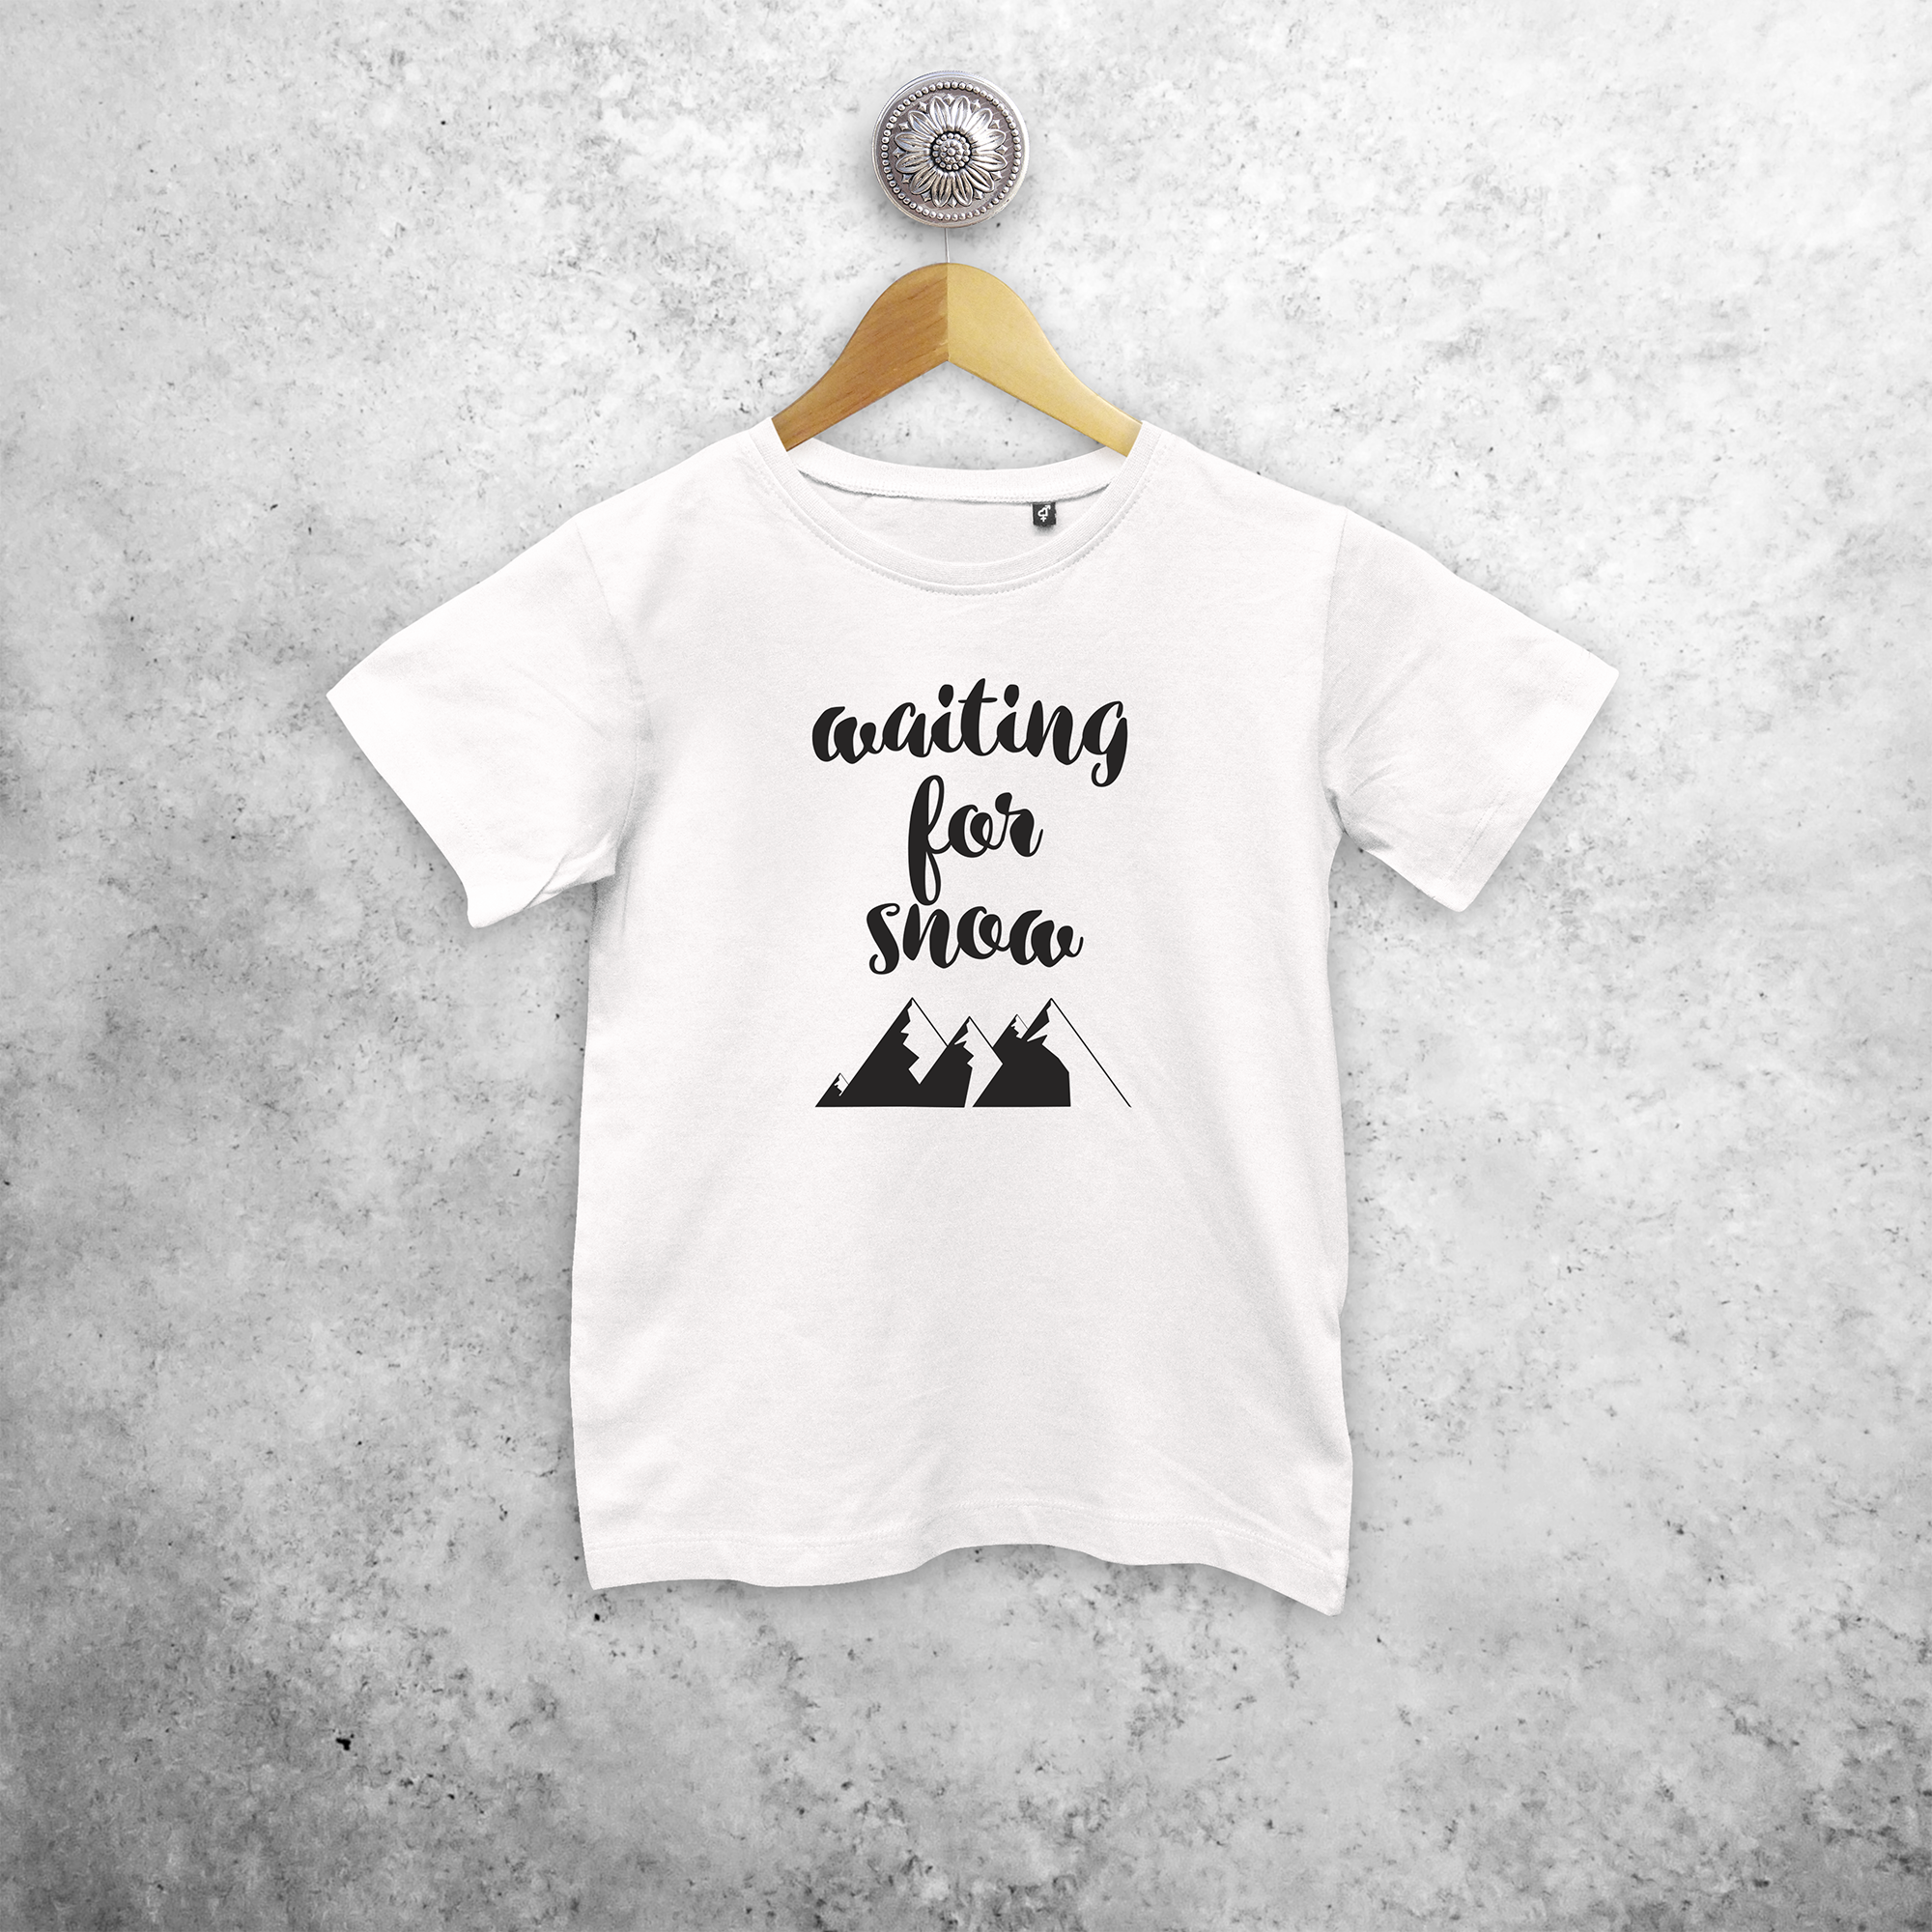 Kids shirt with short sleeves, with ‘Waiting for snow’ print by KMLeon.